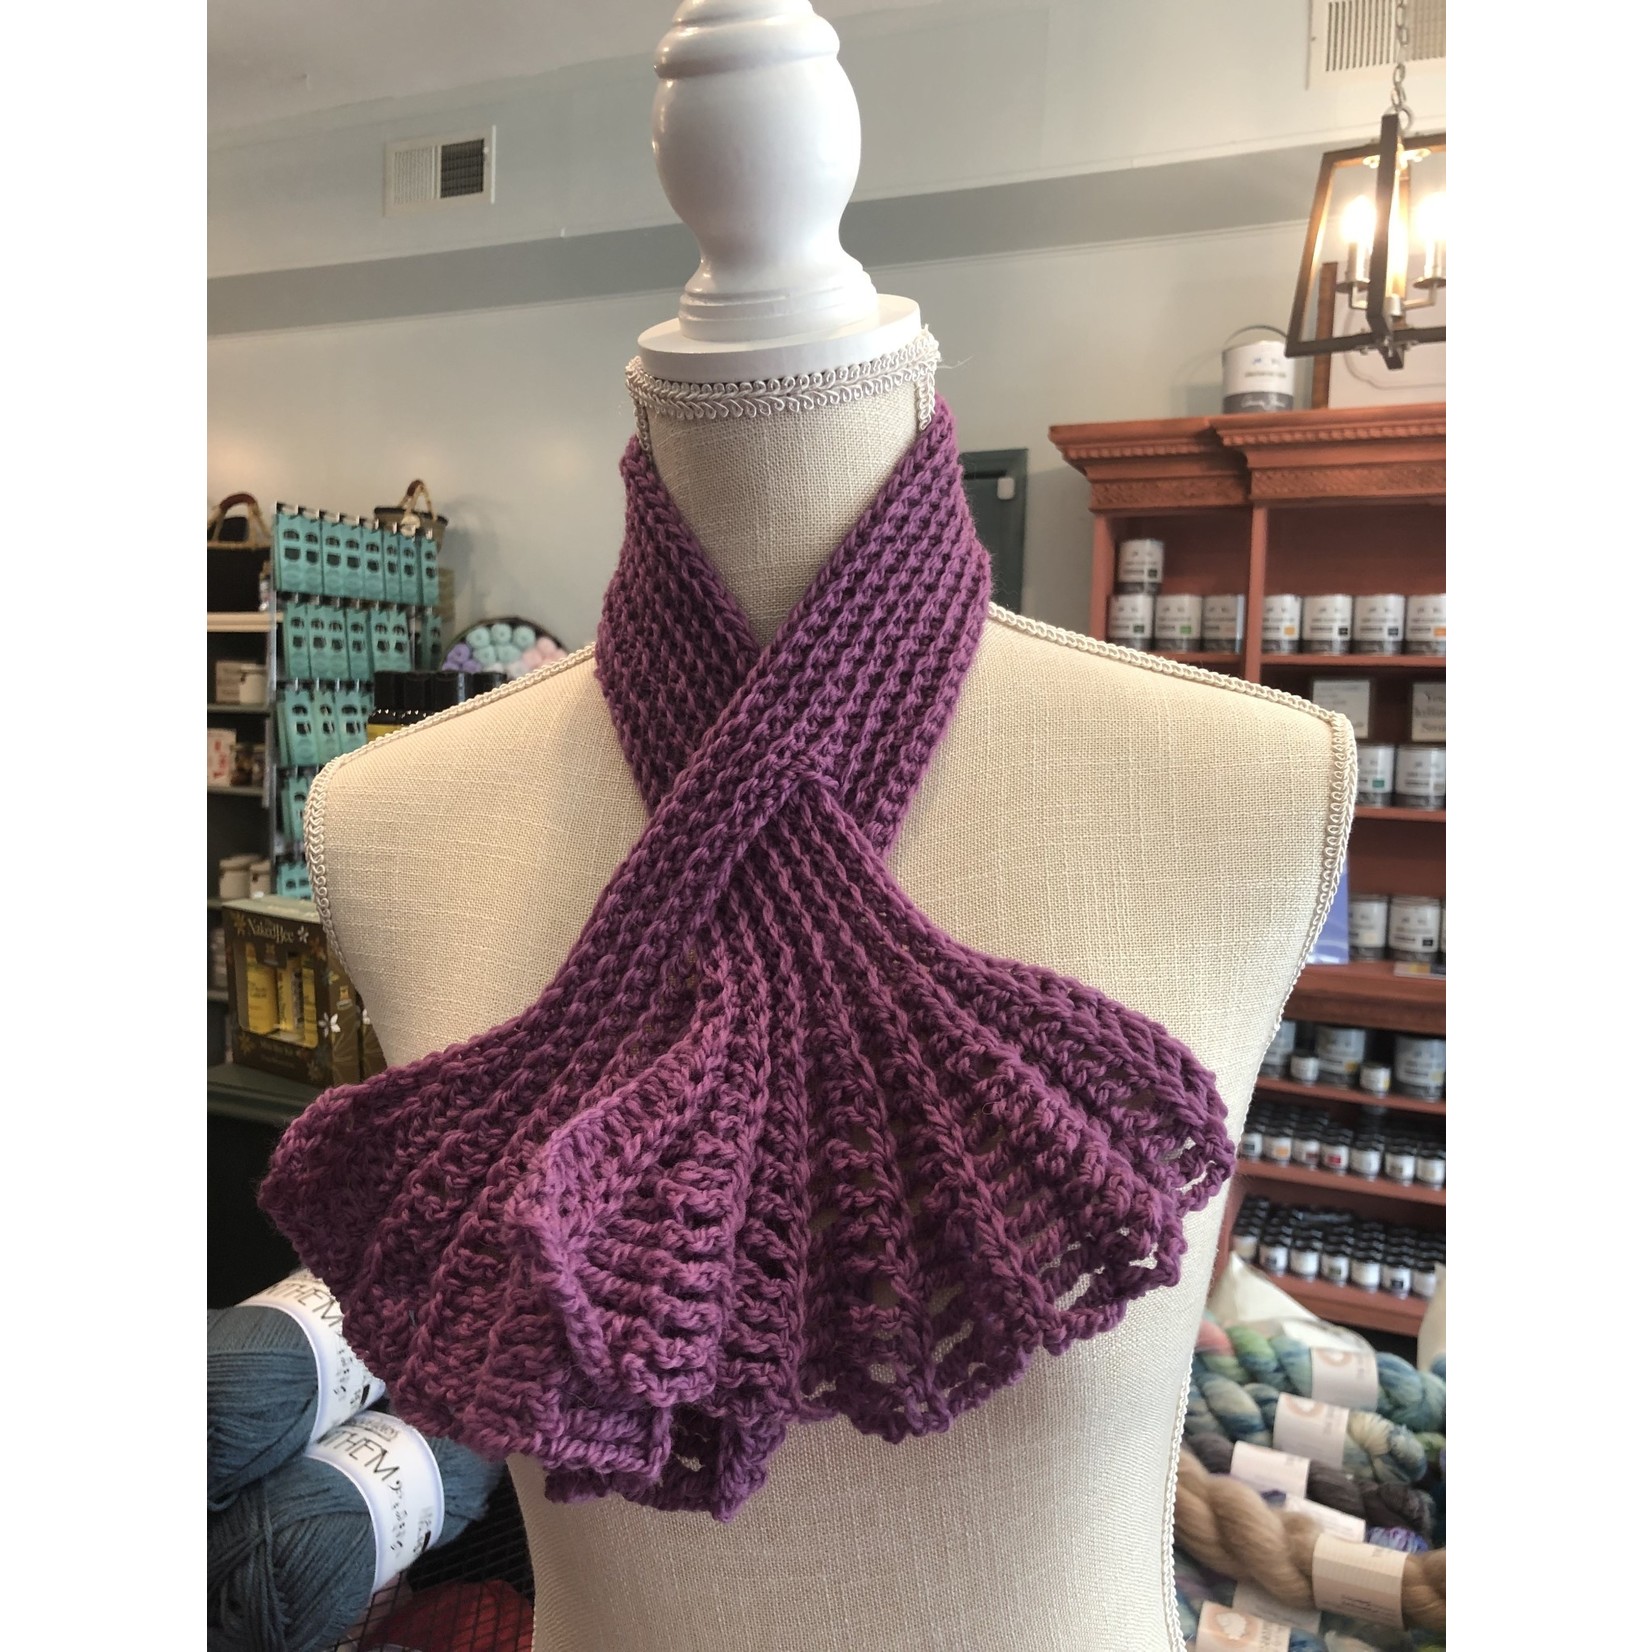 KKN February Intro to Crochet – Learn to Make a Scarf – Feb 1st, 8th, 15th, 22nd 1:30-3:30pm